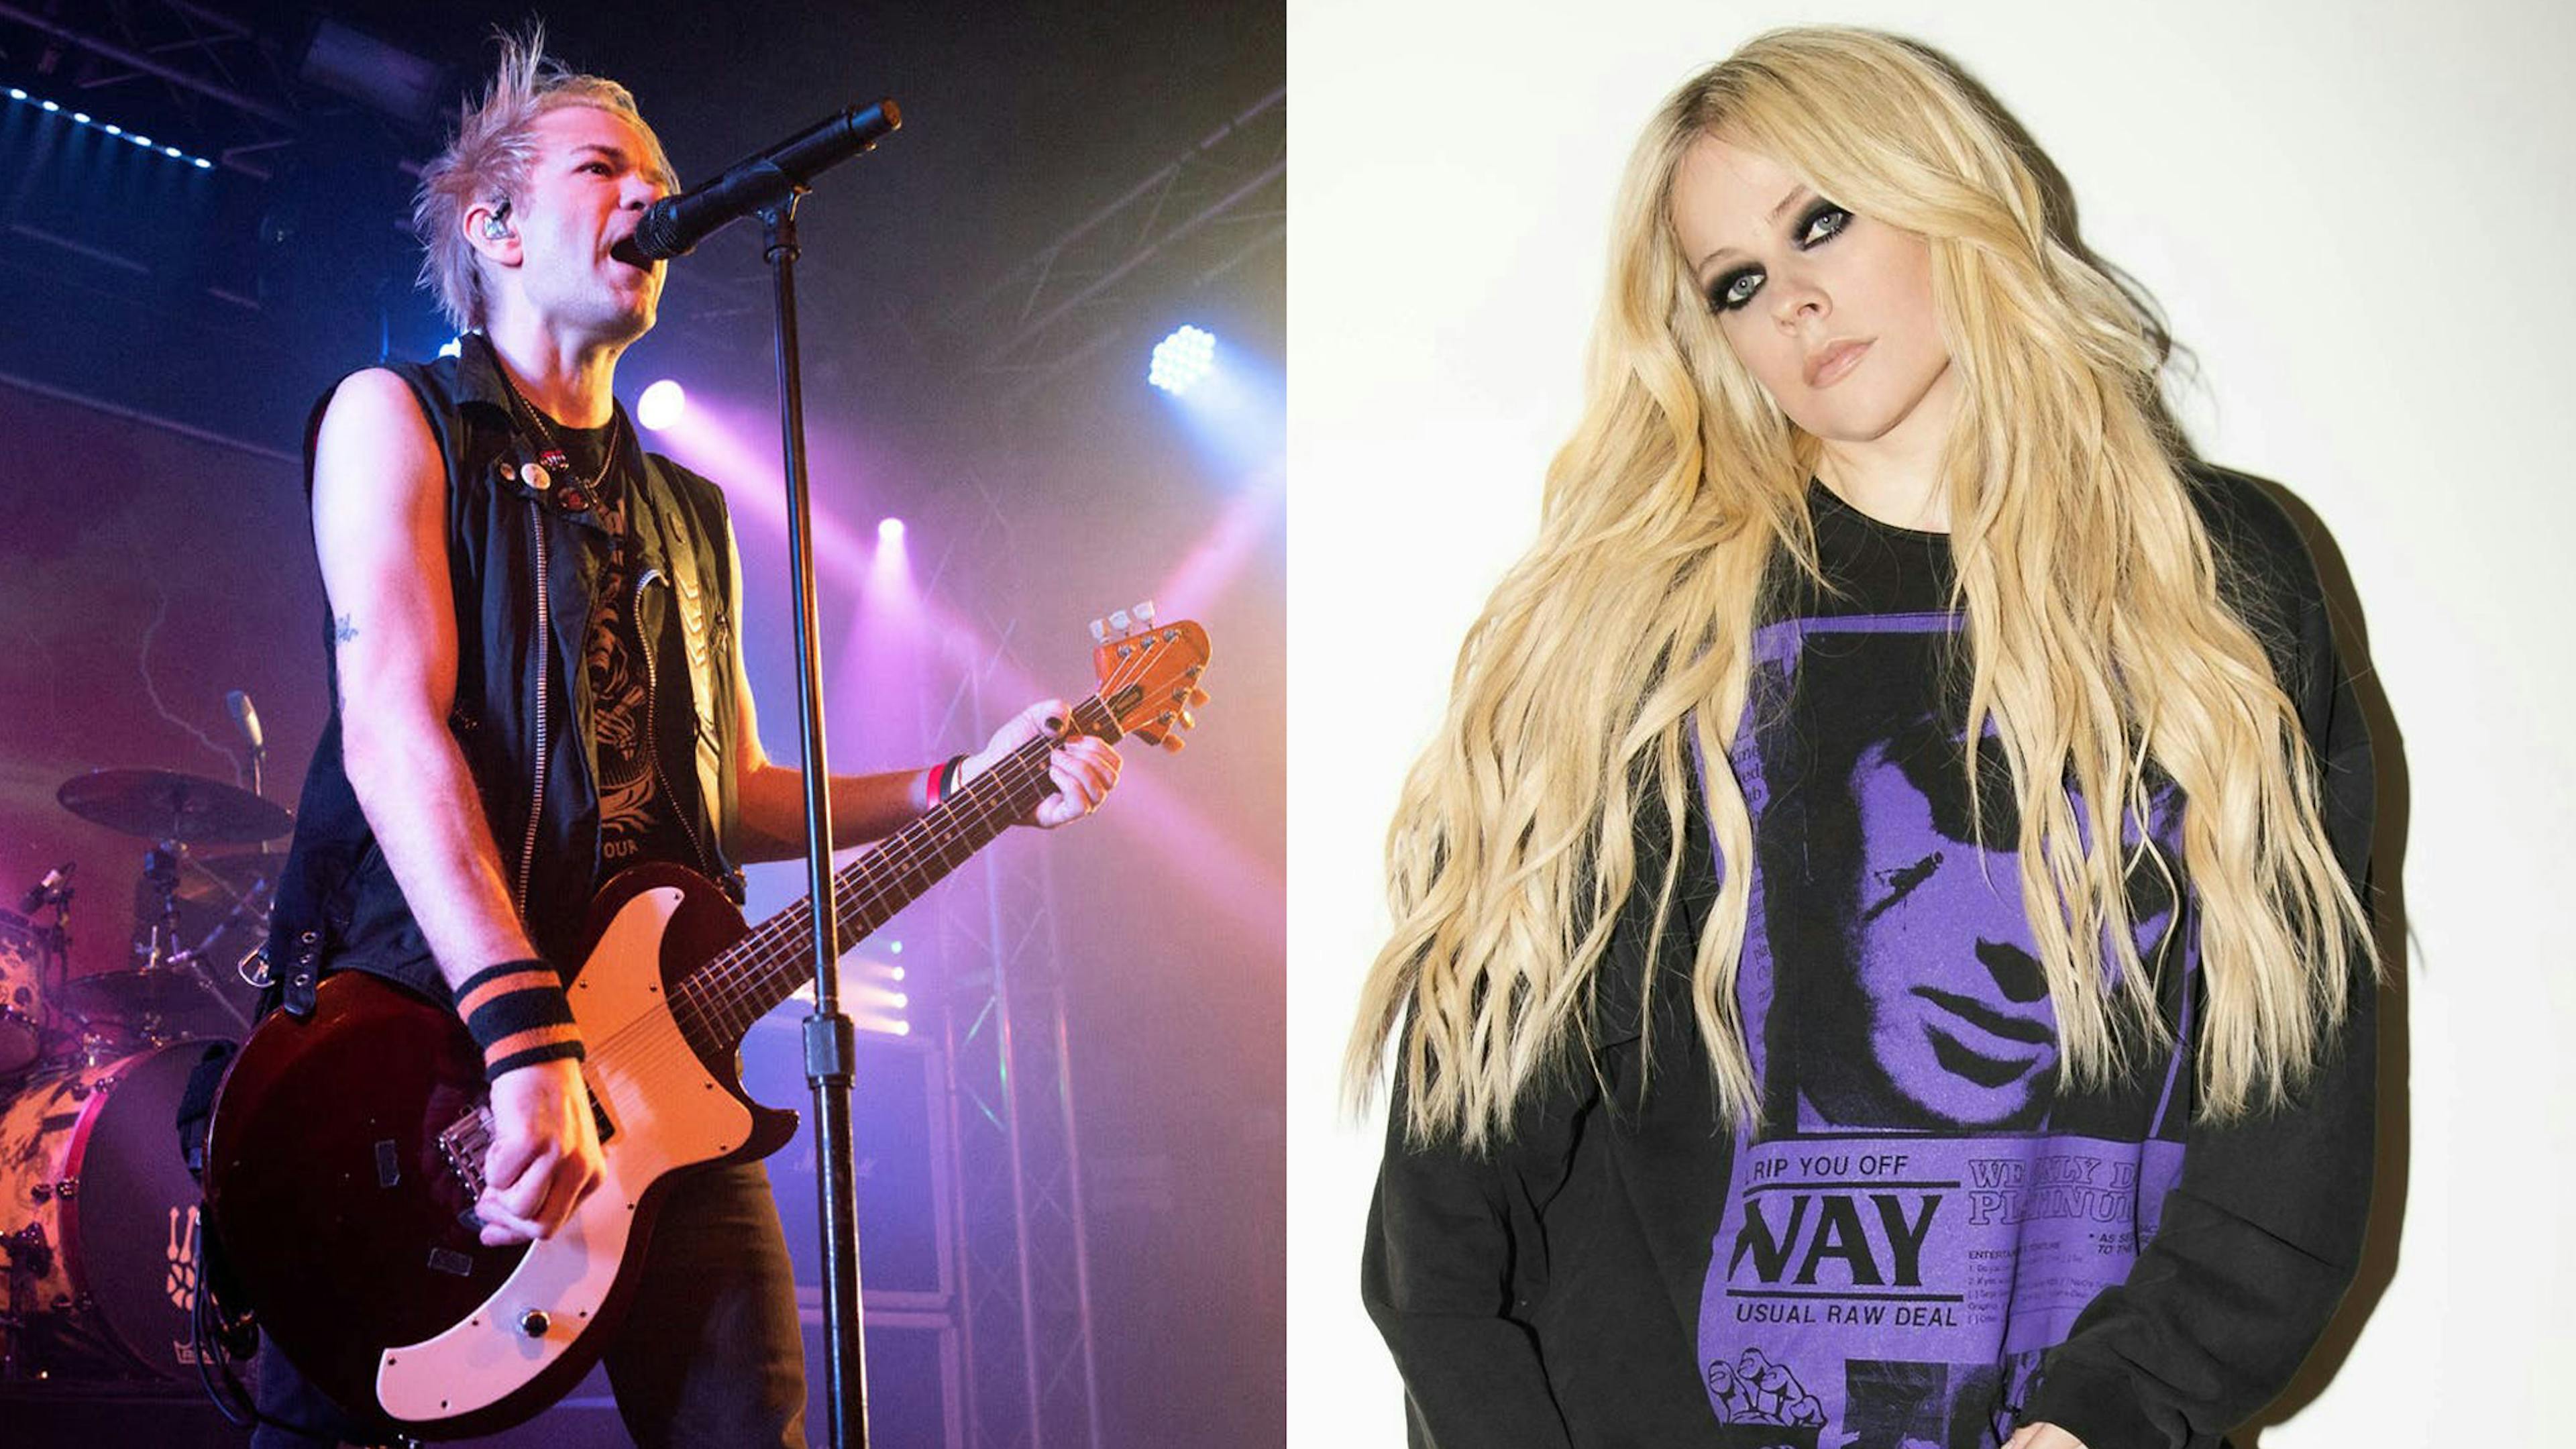 See Deryck Whibley perform In Too Deep with Avril Lavigne on her Greatest Hits tour